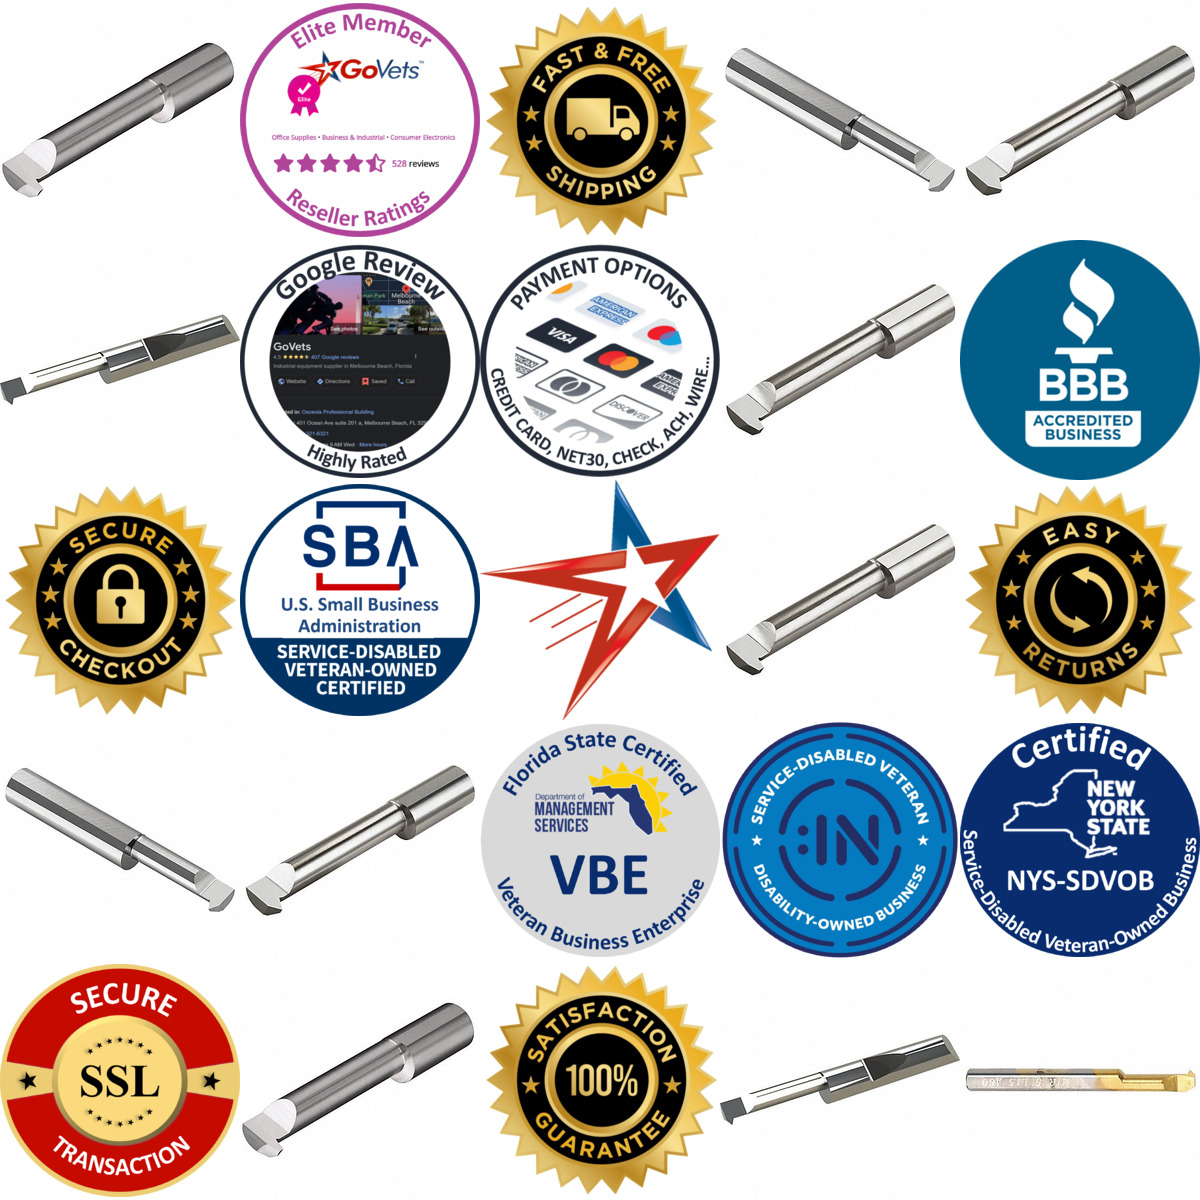 A selection of Internal Threading Tools products on GoVets